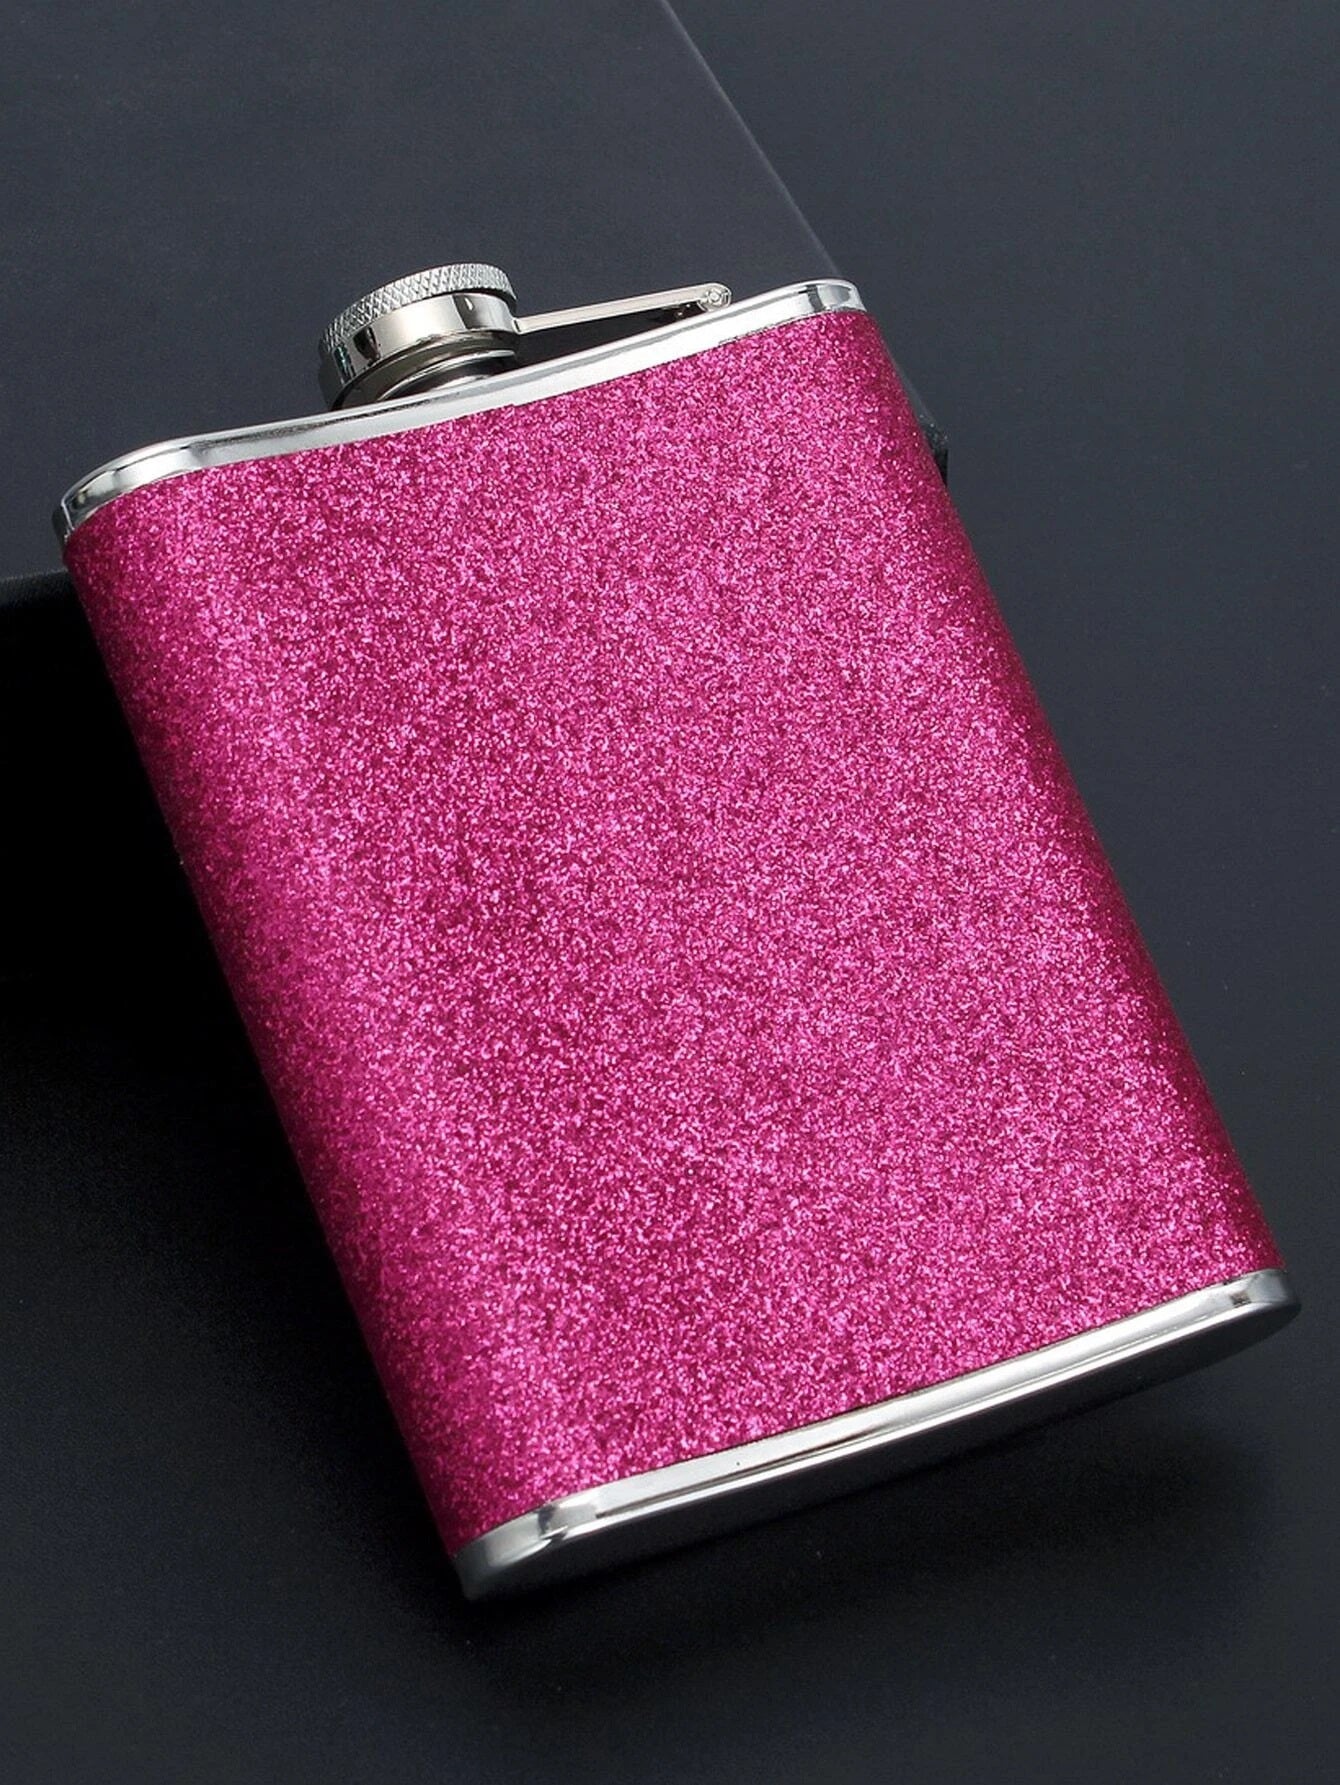 Girl's Night Out Flask